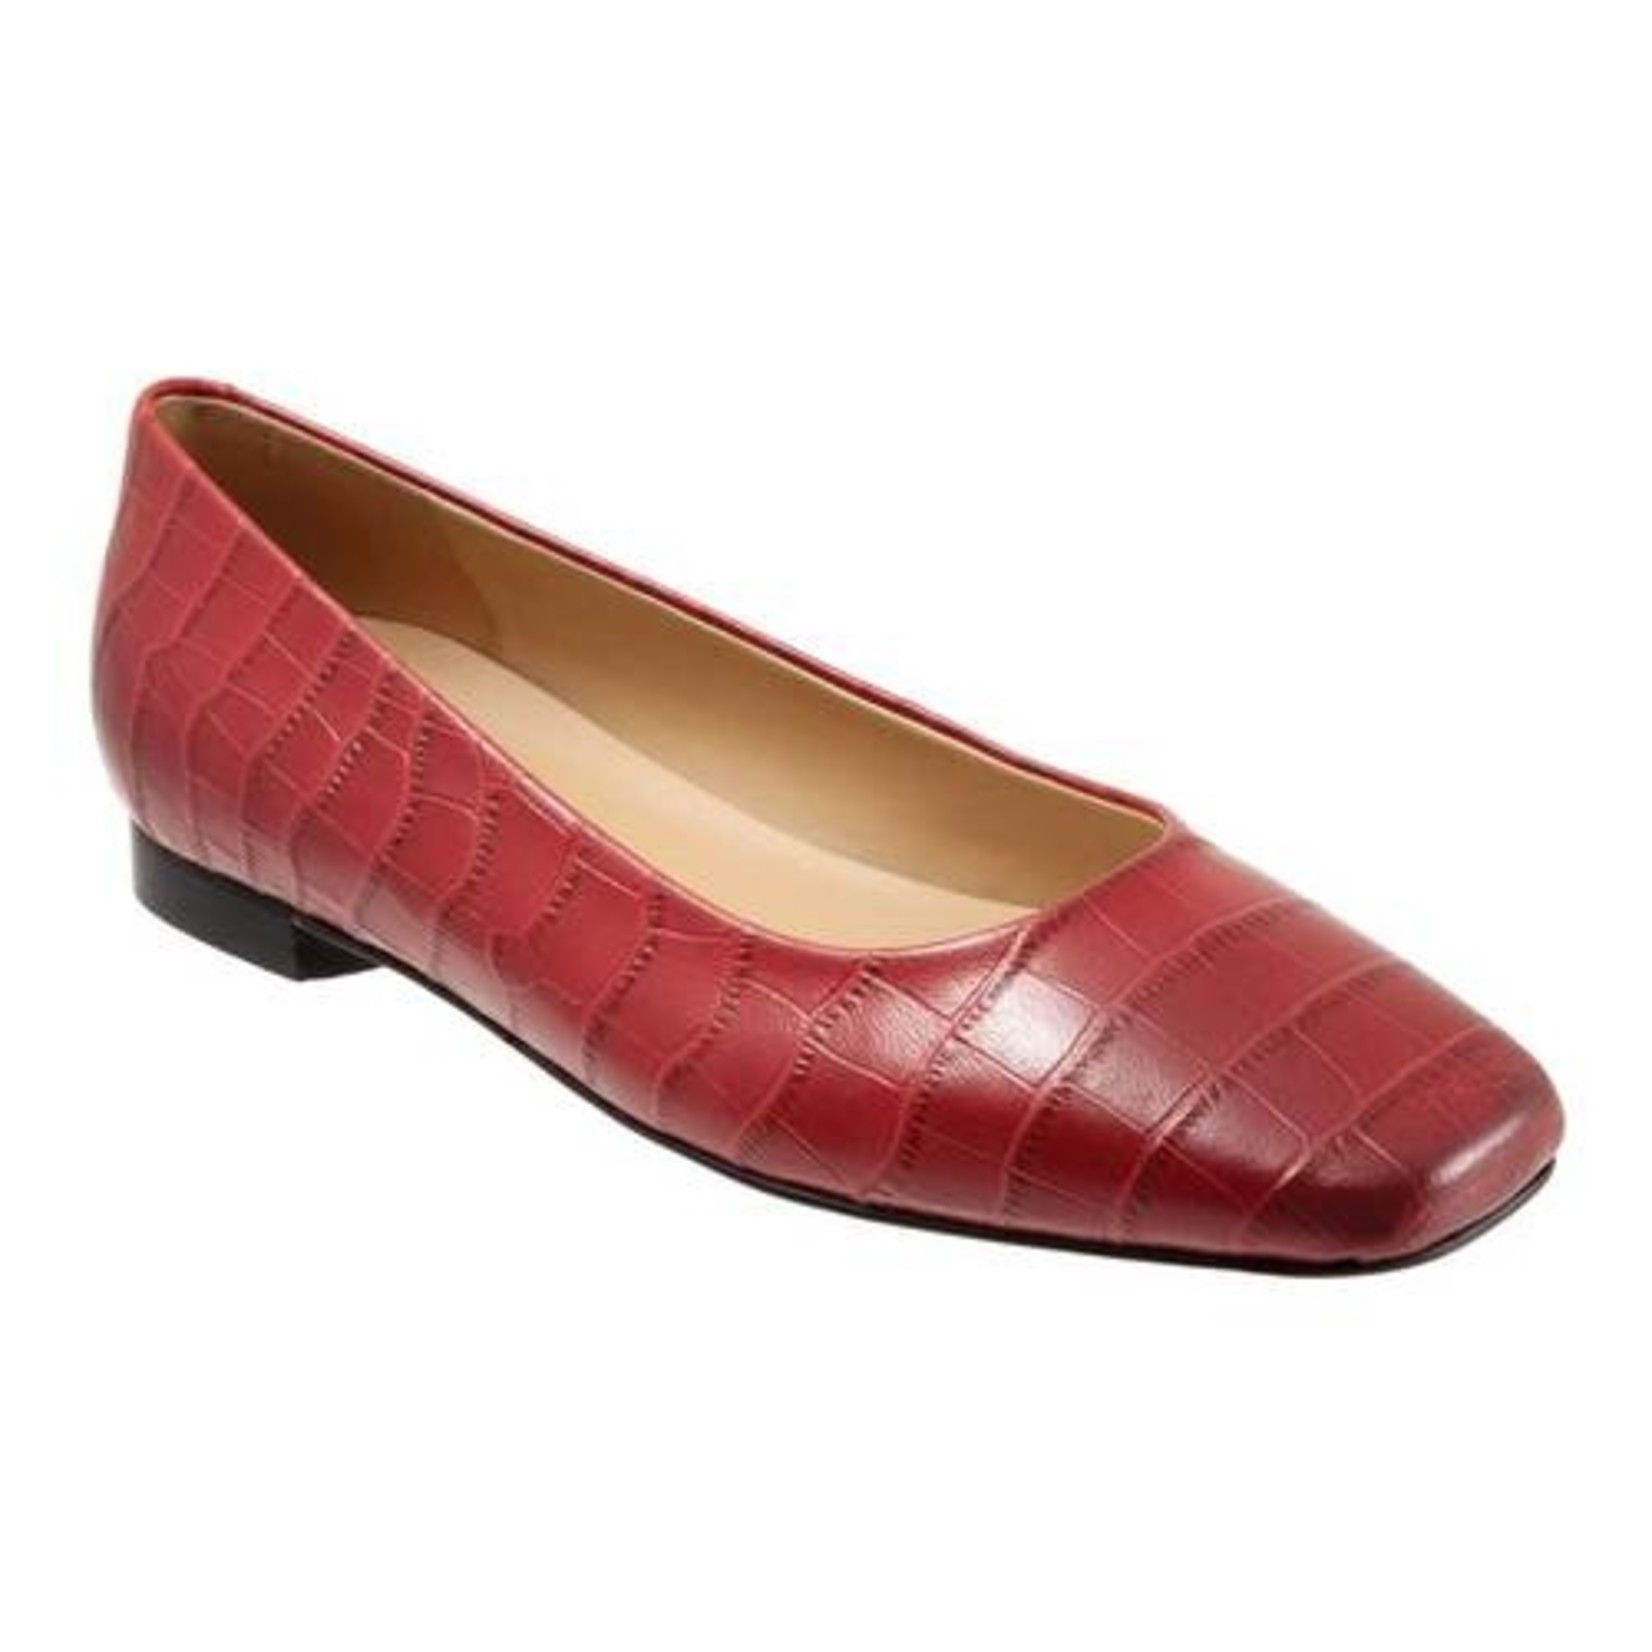 Trotters Trotters Honor Women’s Slip-On Shoes